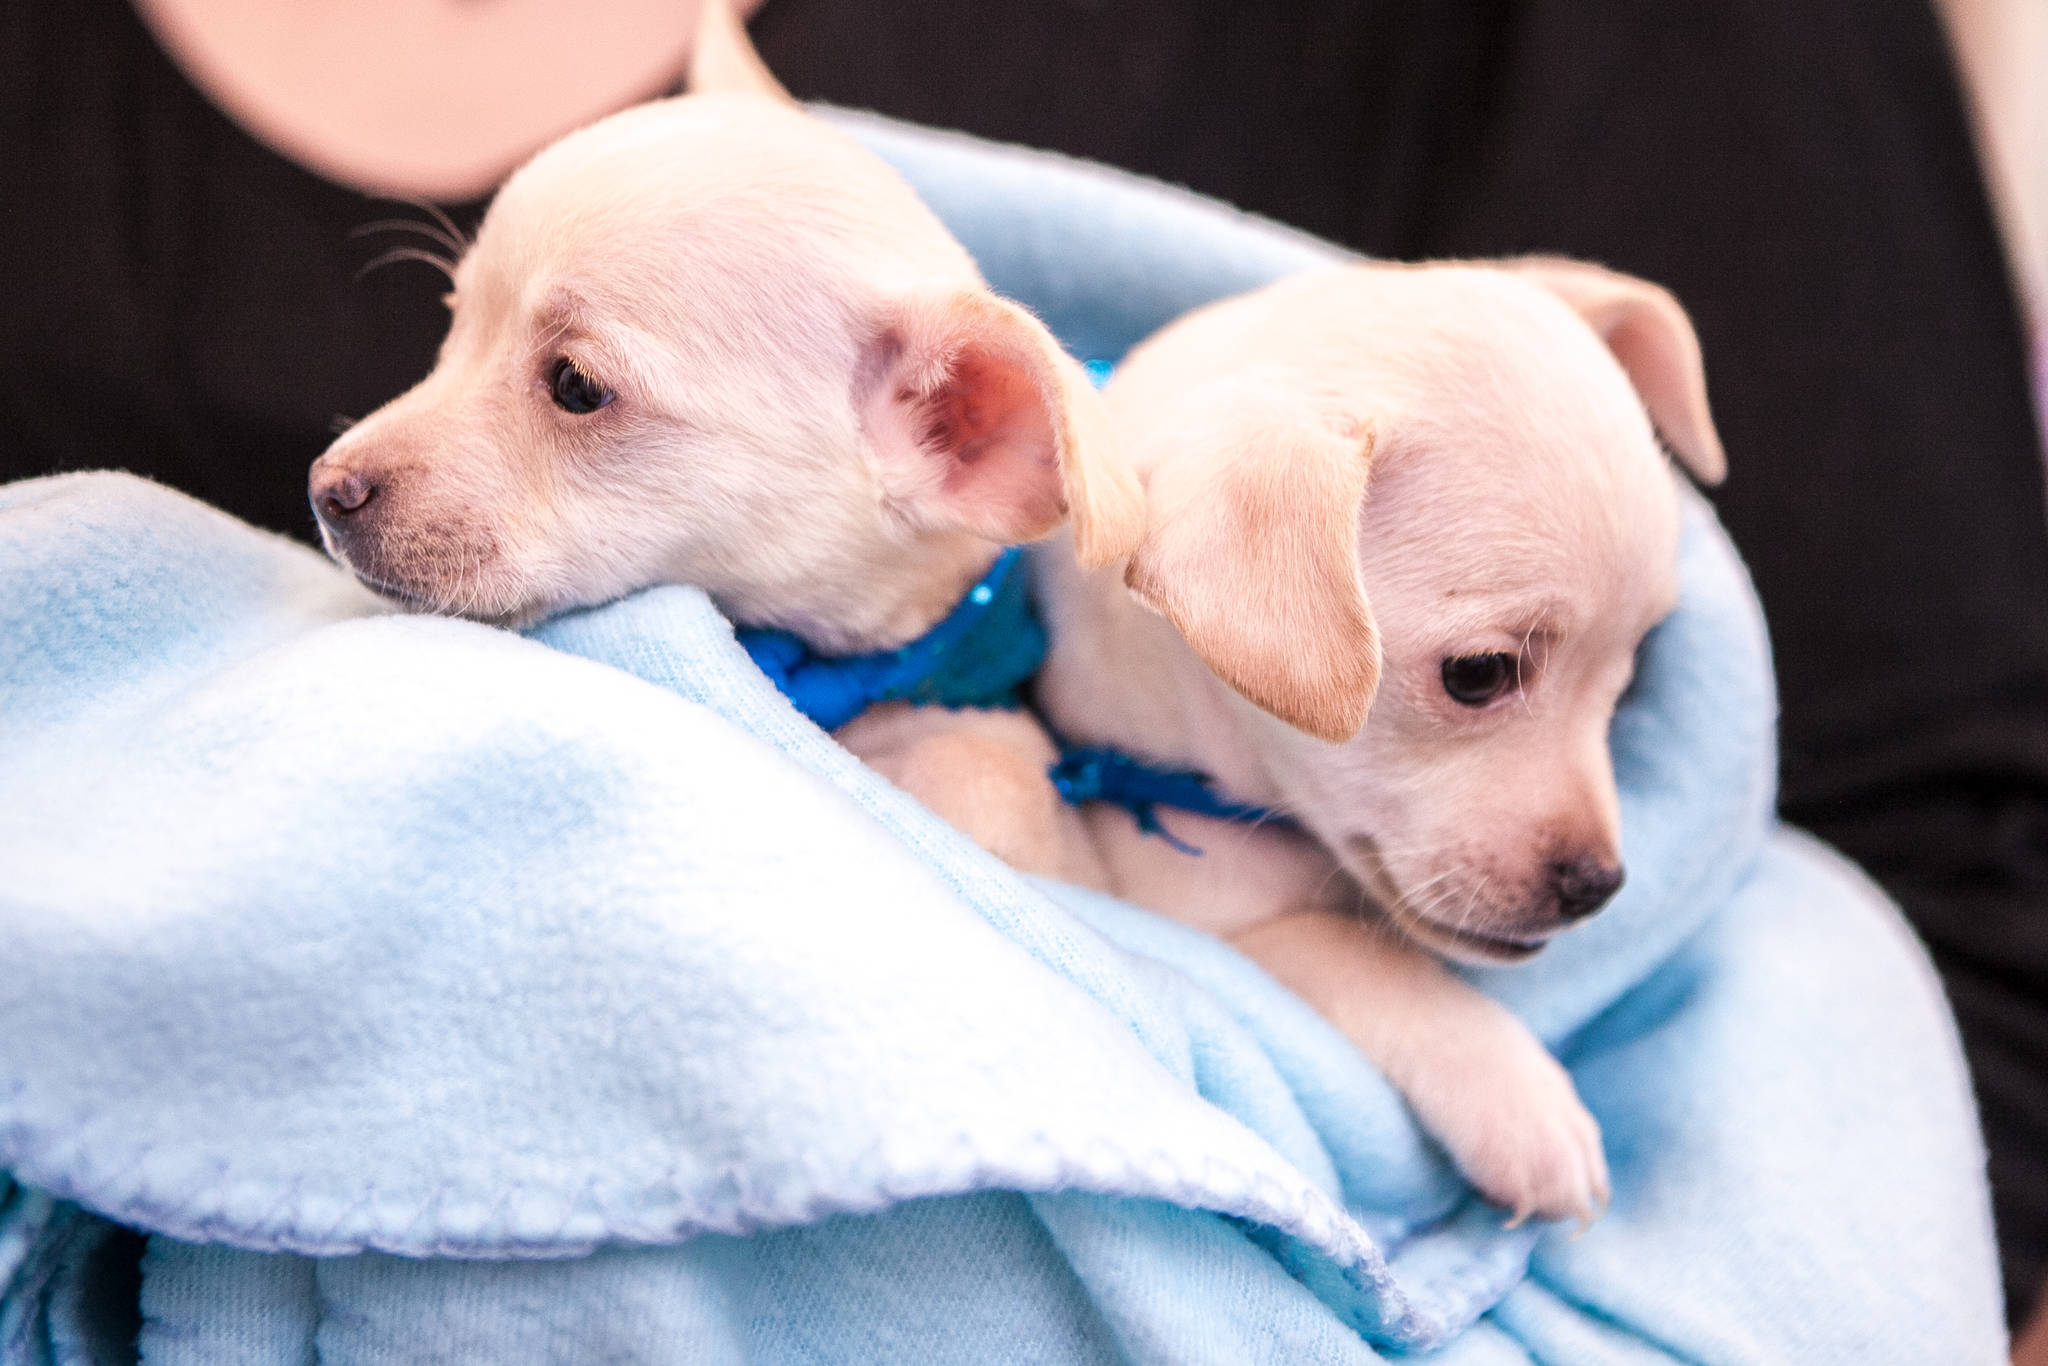 Some really small puppies were the guest of honor at the KHS Animal Krackers event last week.